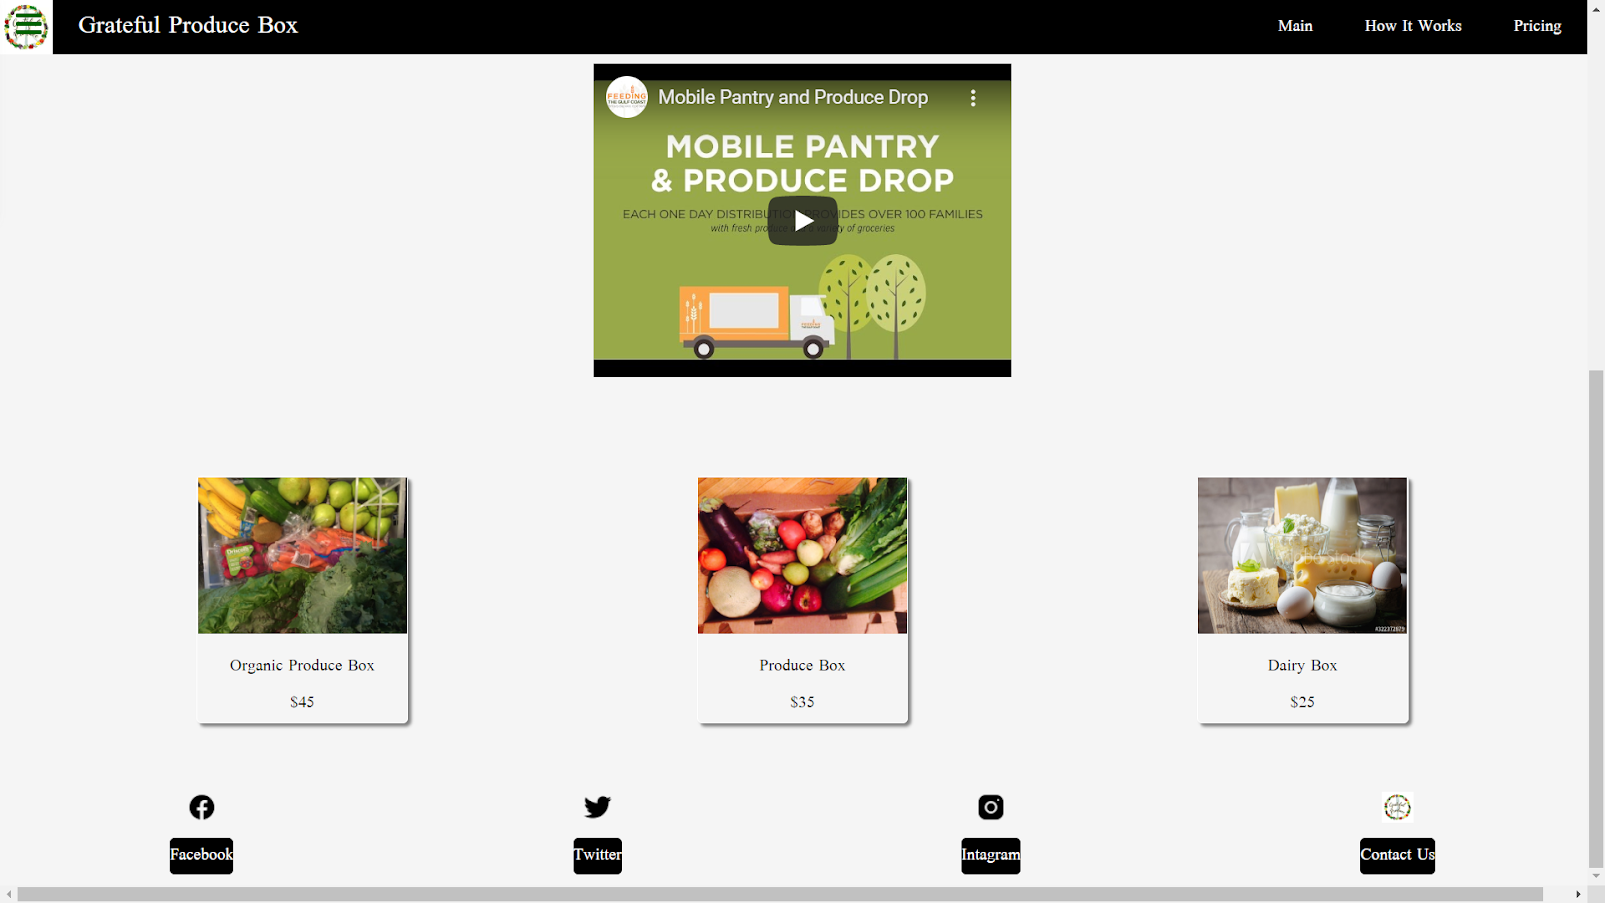 Project 2. Grateful Produce Box dot com. Grocery Delivery Service
Fresh fruits and vegetables delivered straight to your door. 